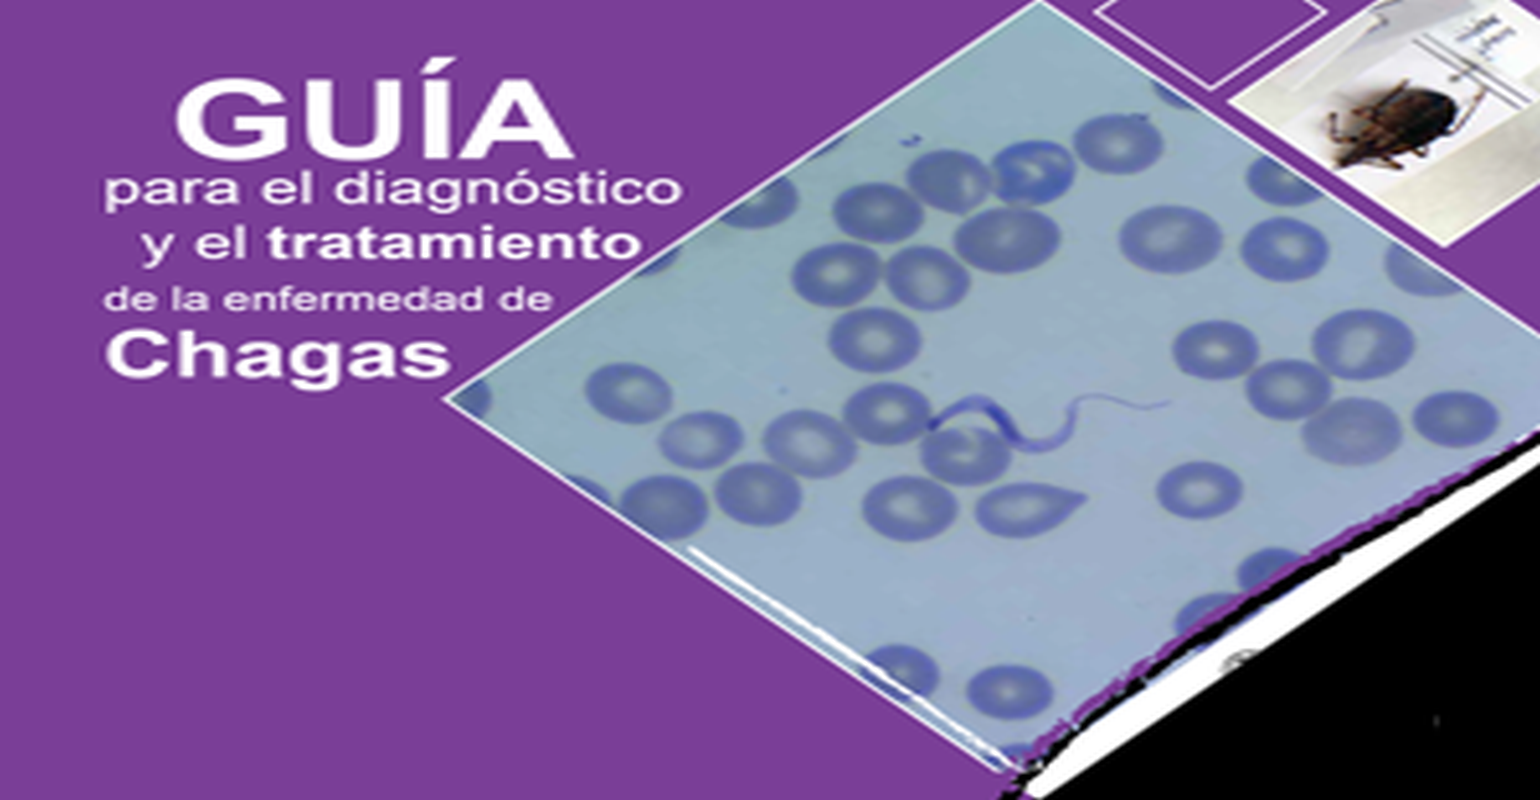 PAHO Issues New Guide for Diagnosis and Treatment of Chagas Disease